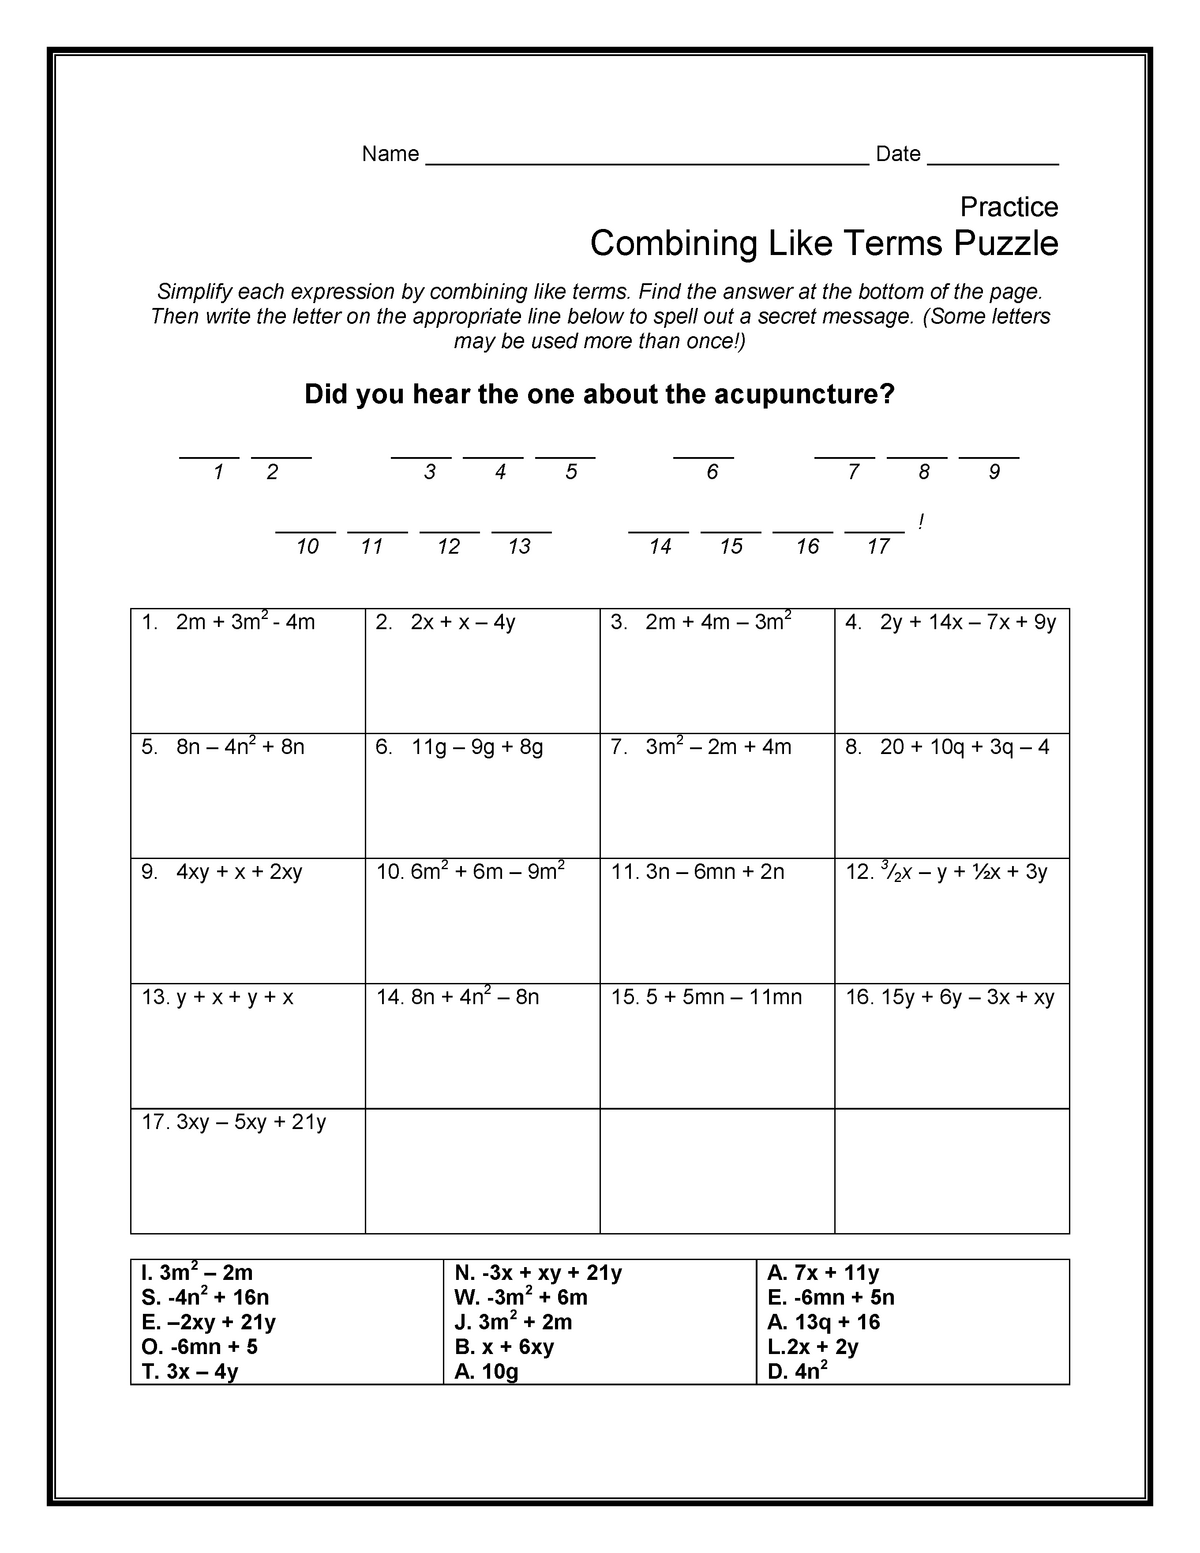 10 - Combining Like Terms Puzzle - Name Date ______ - StuDocu With Regard To Combining Like Terms Practice Worksheet